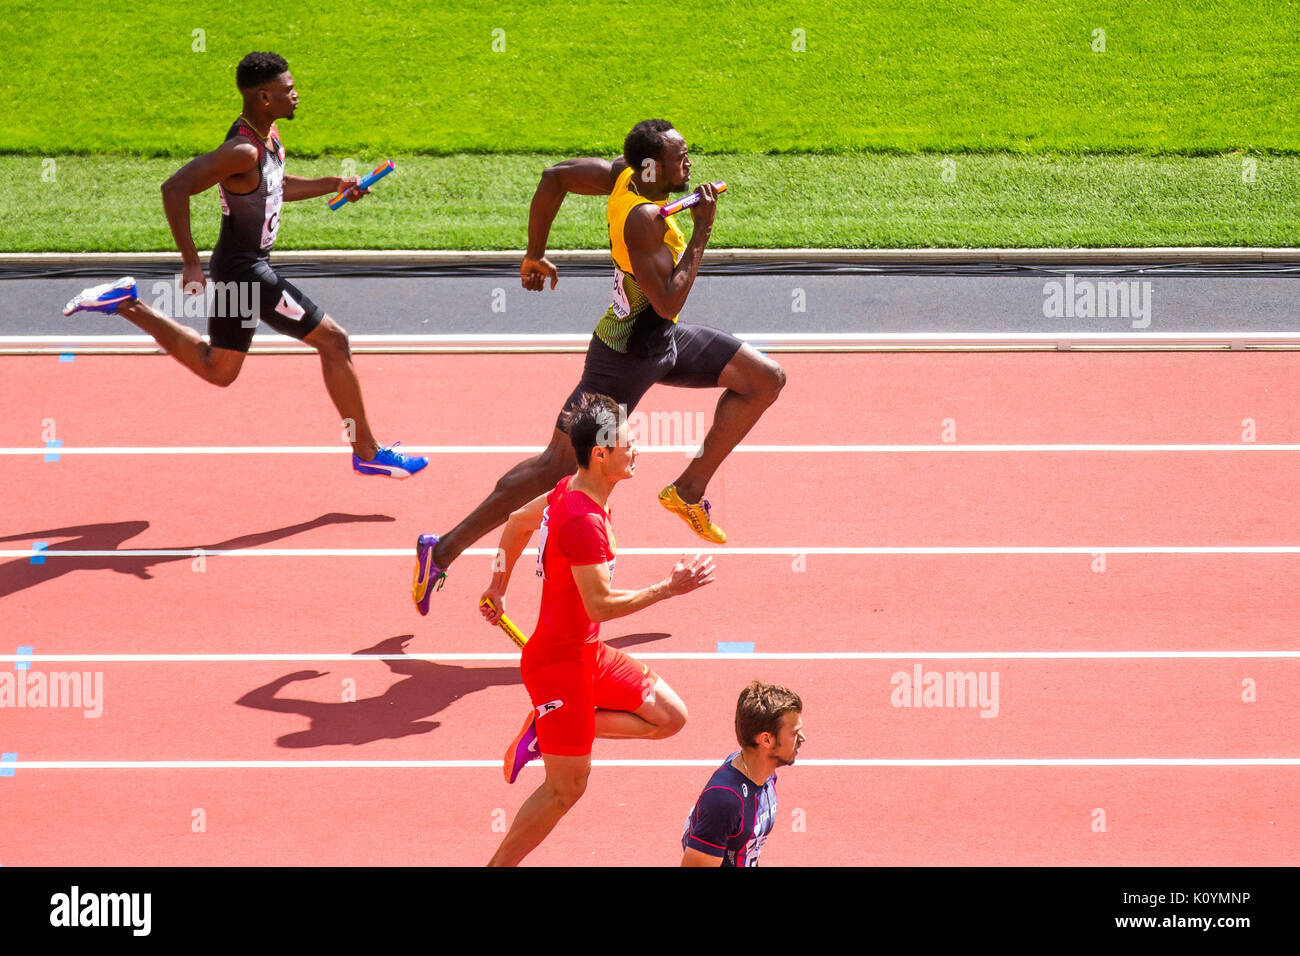 Usain Bolt competes in the heats of the 4x100m relay event at London 2017, held in the Olympic Stadium on August 12, 2017. Stock Photo